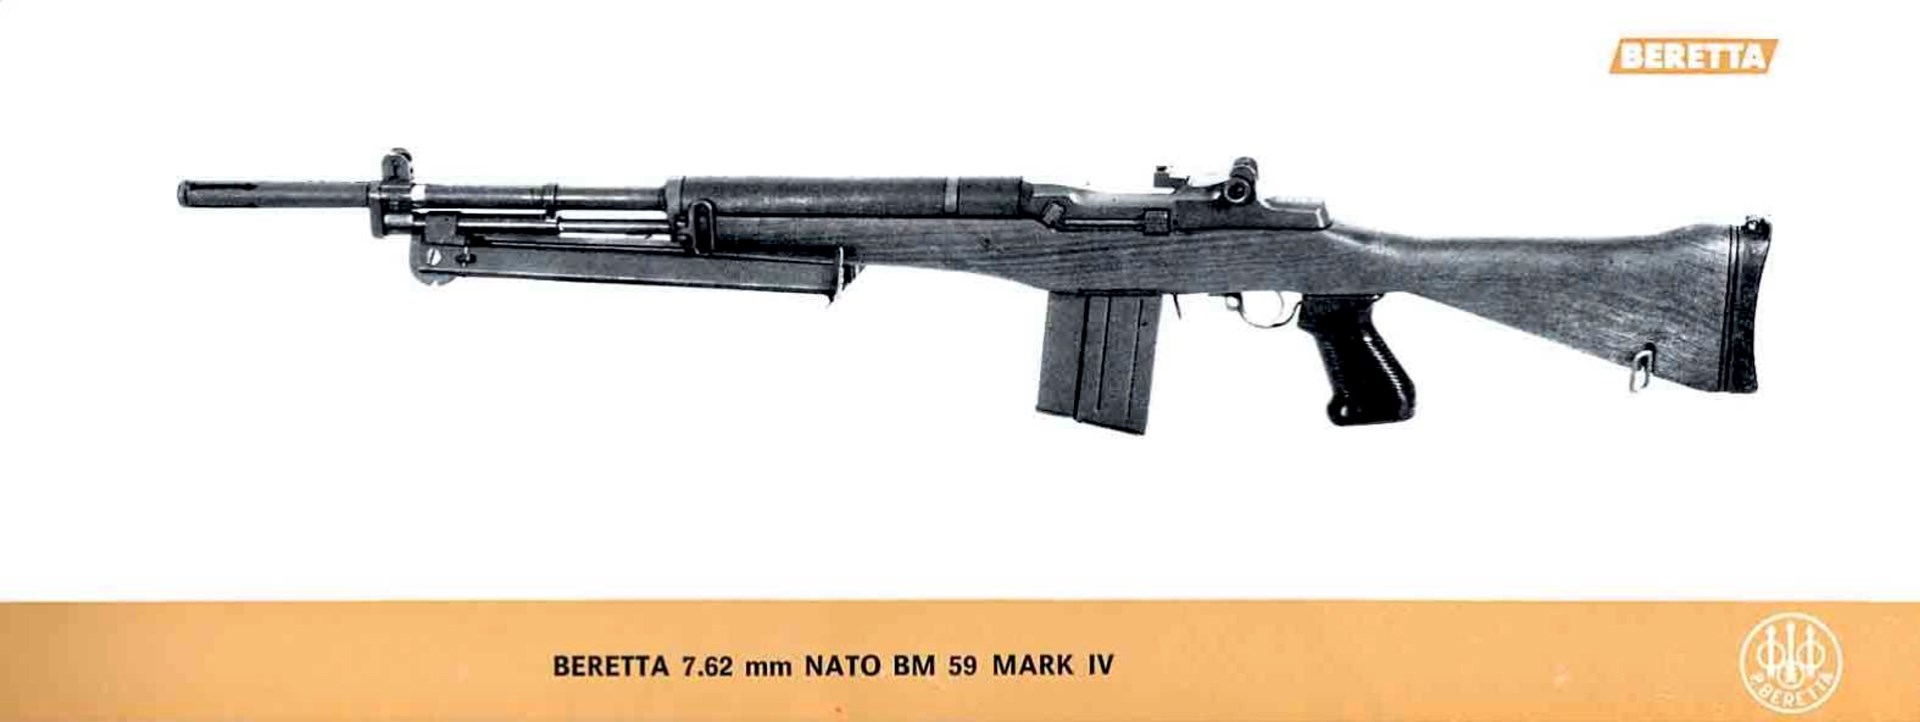 The entry for the BM-59 Mk. IV that appeared in the Beretta BM-59 sales literature.